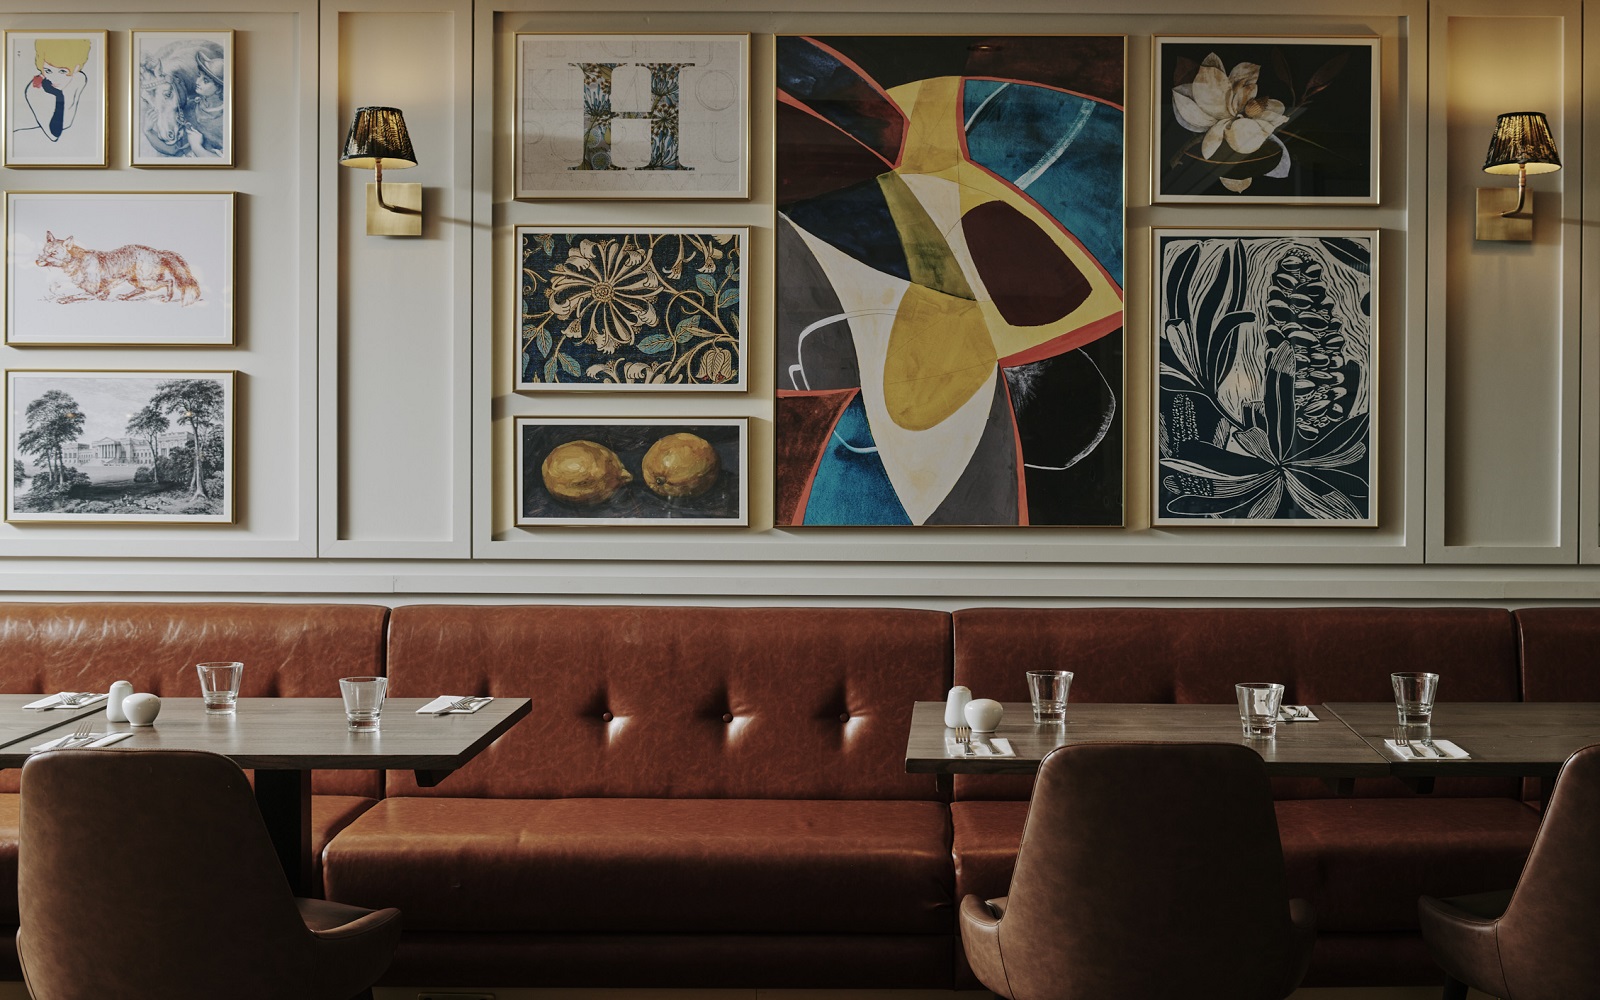 eclectic mix of art on the wall of restaurant in Horwood House hotel behind leather banquette seating